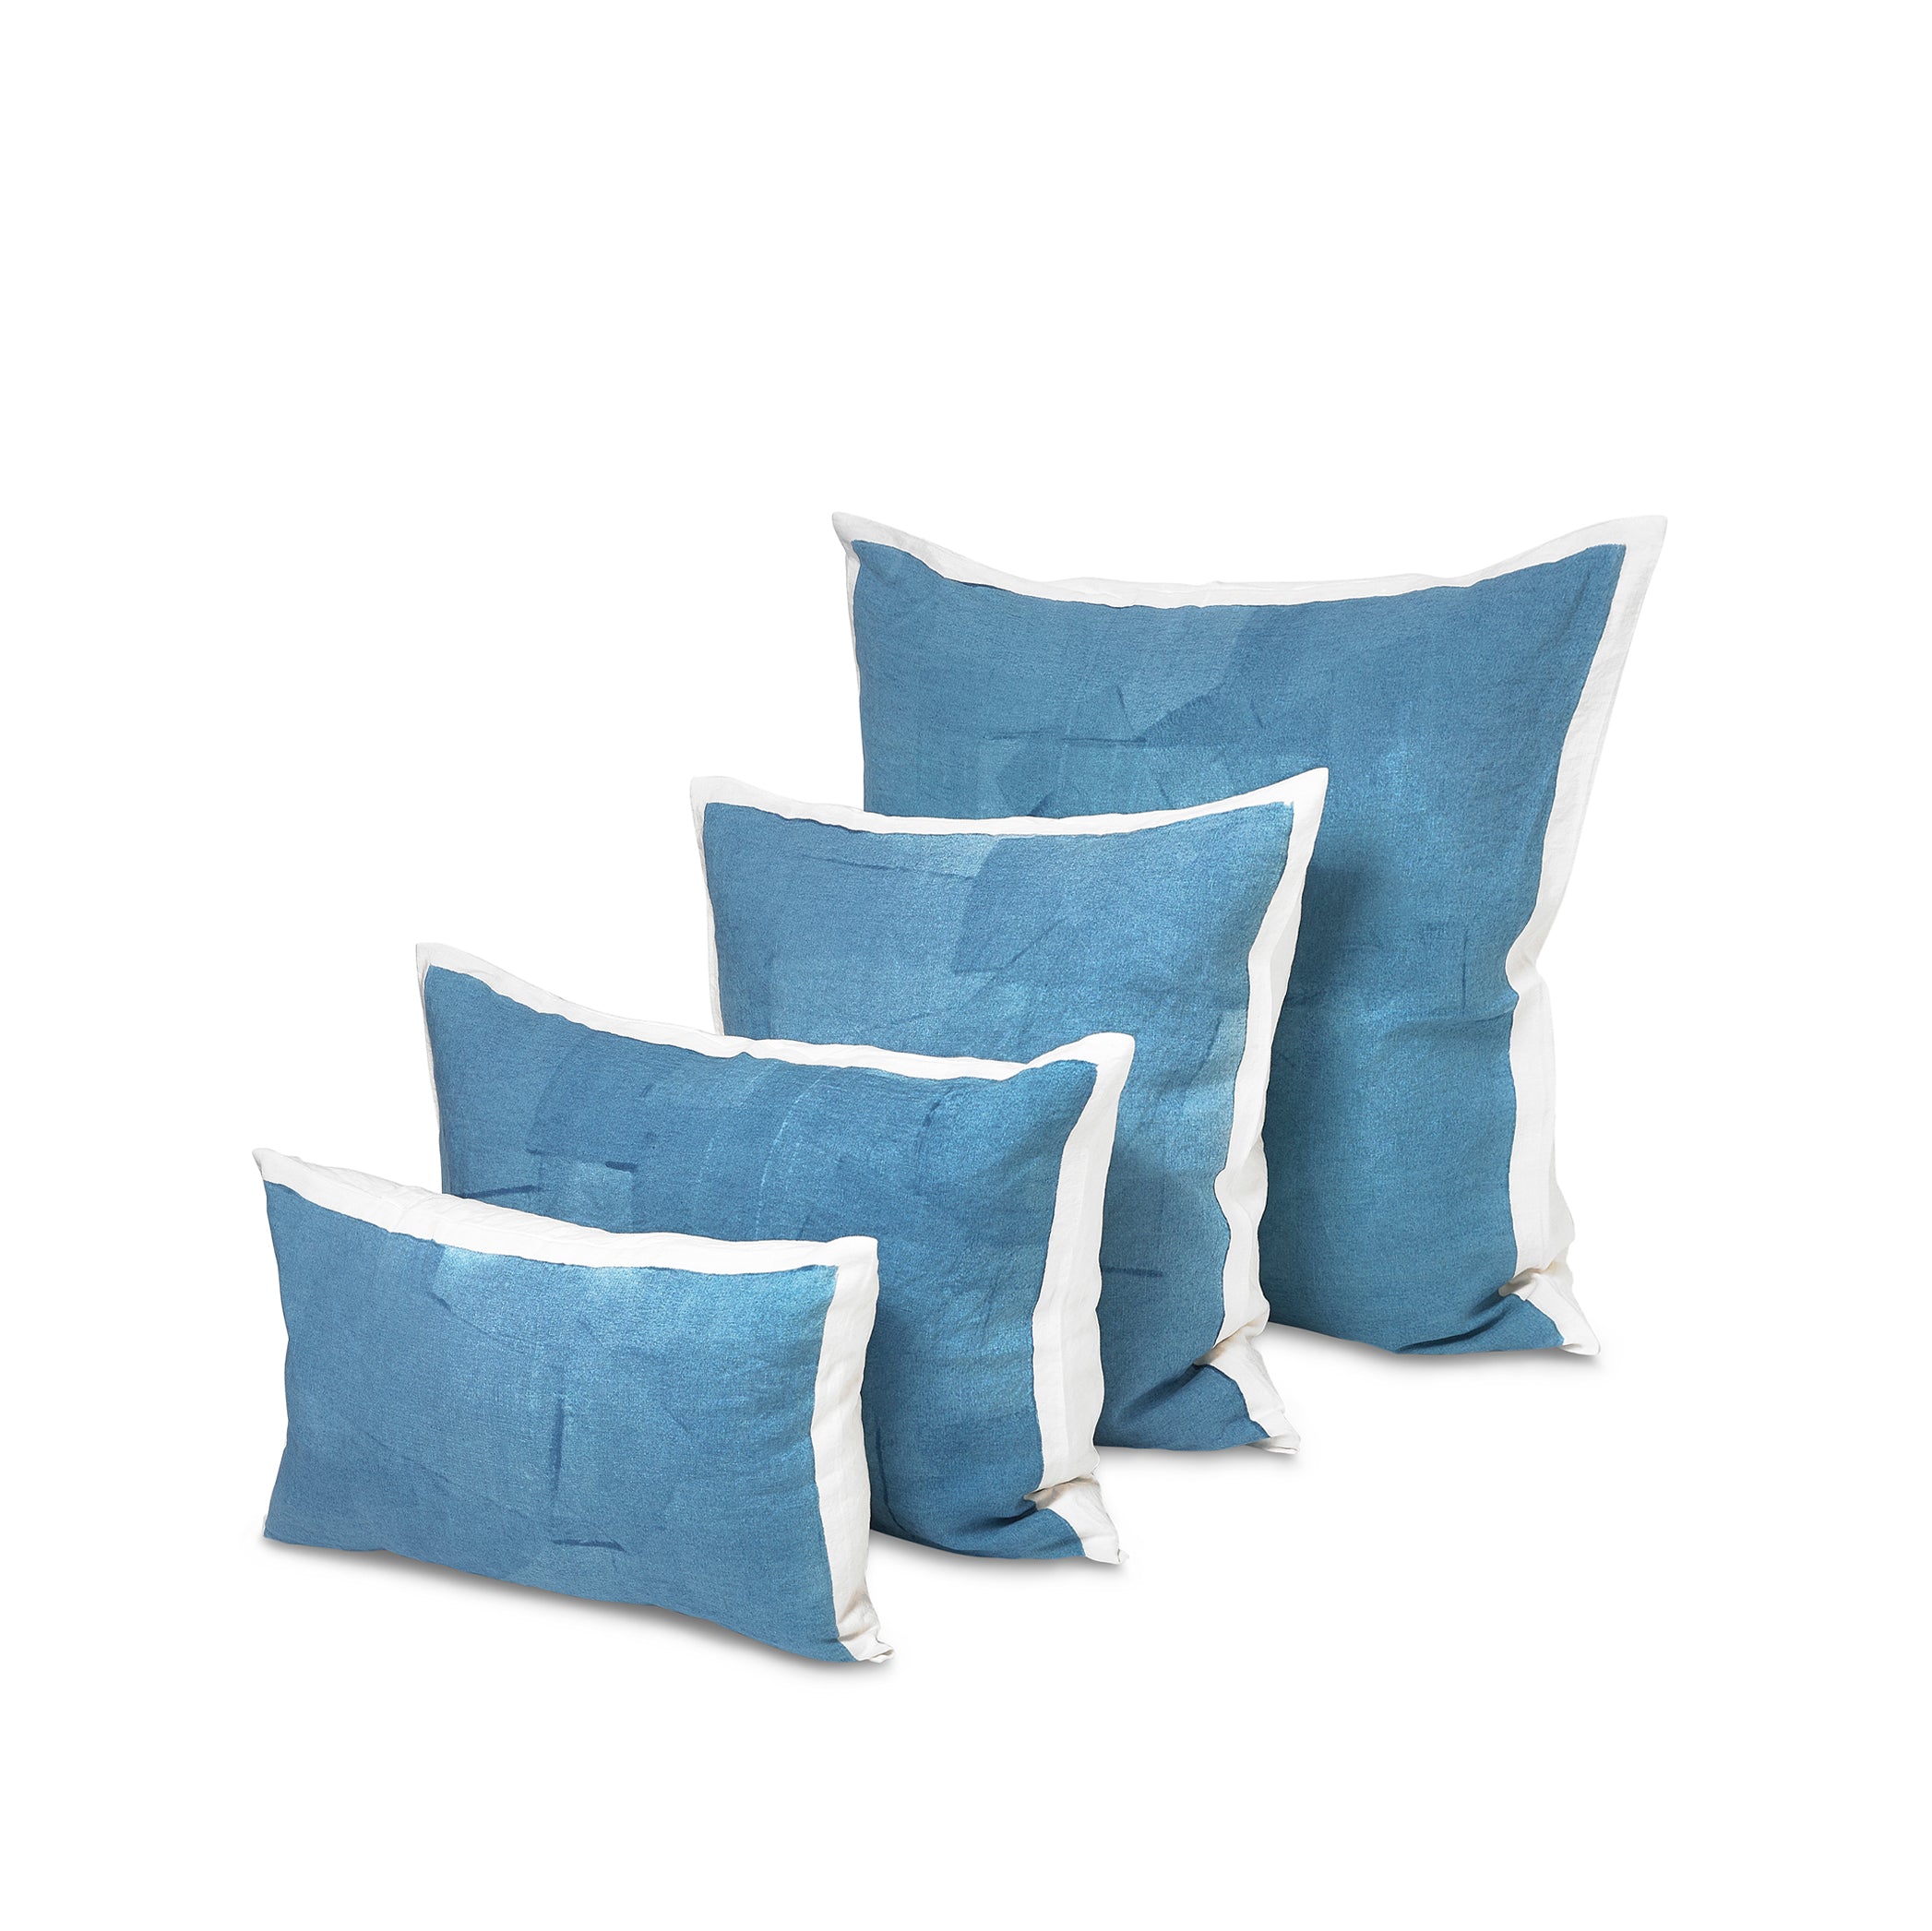 Hand Painted Linen Cushion in Sky Blue, 60cm x 60cm